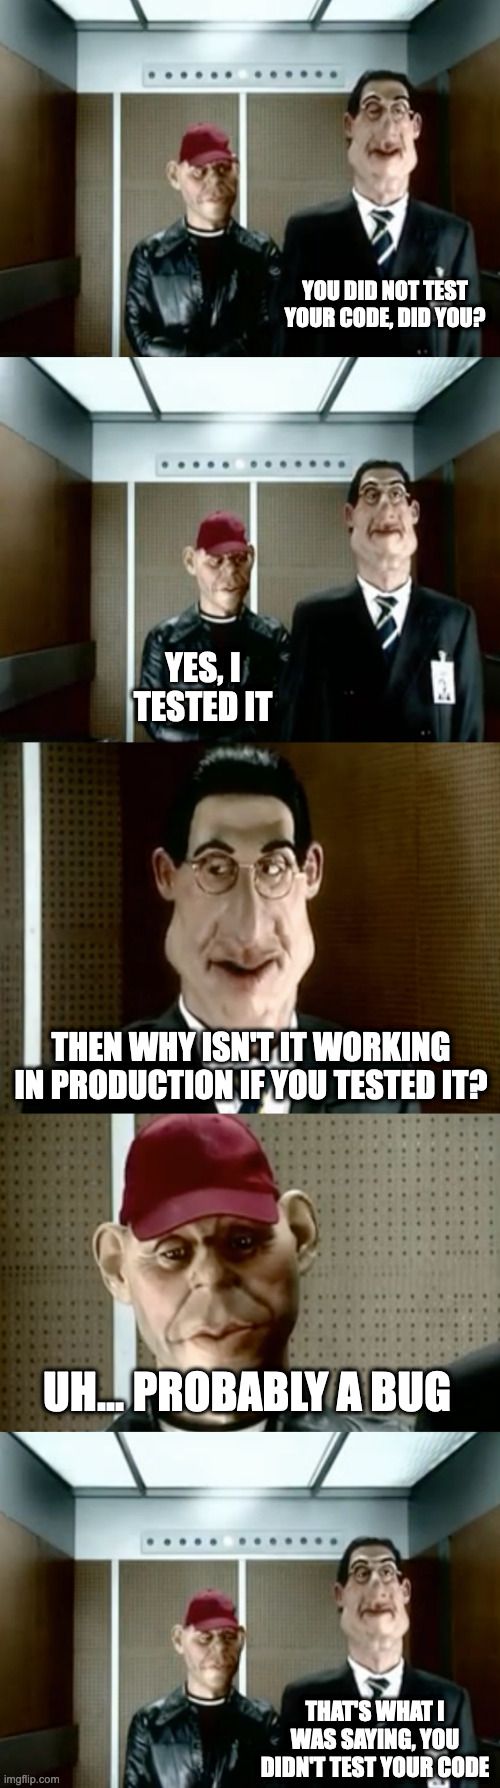 For all those devs who claim to have tested